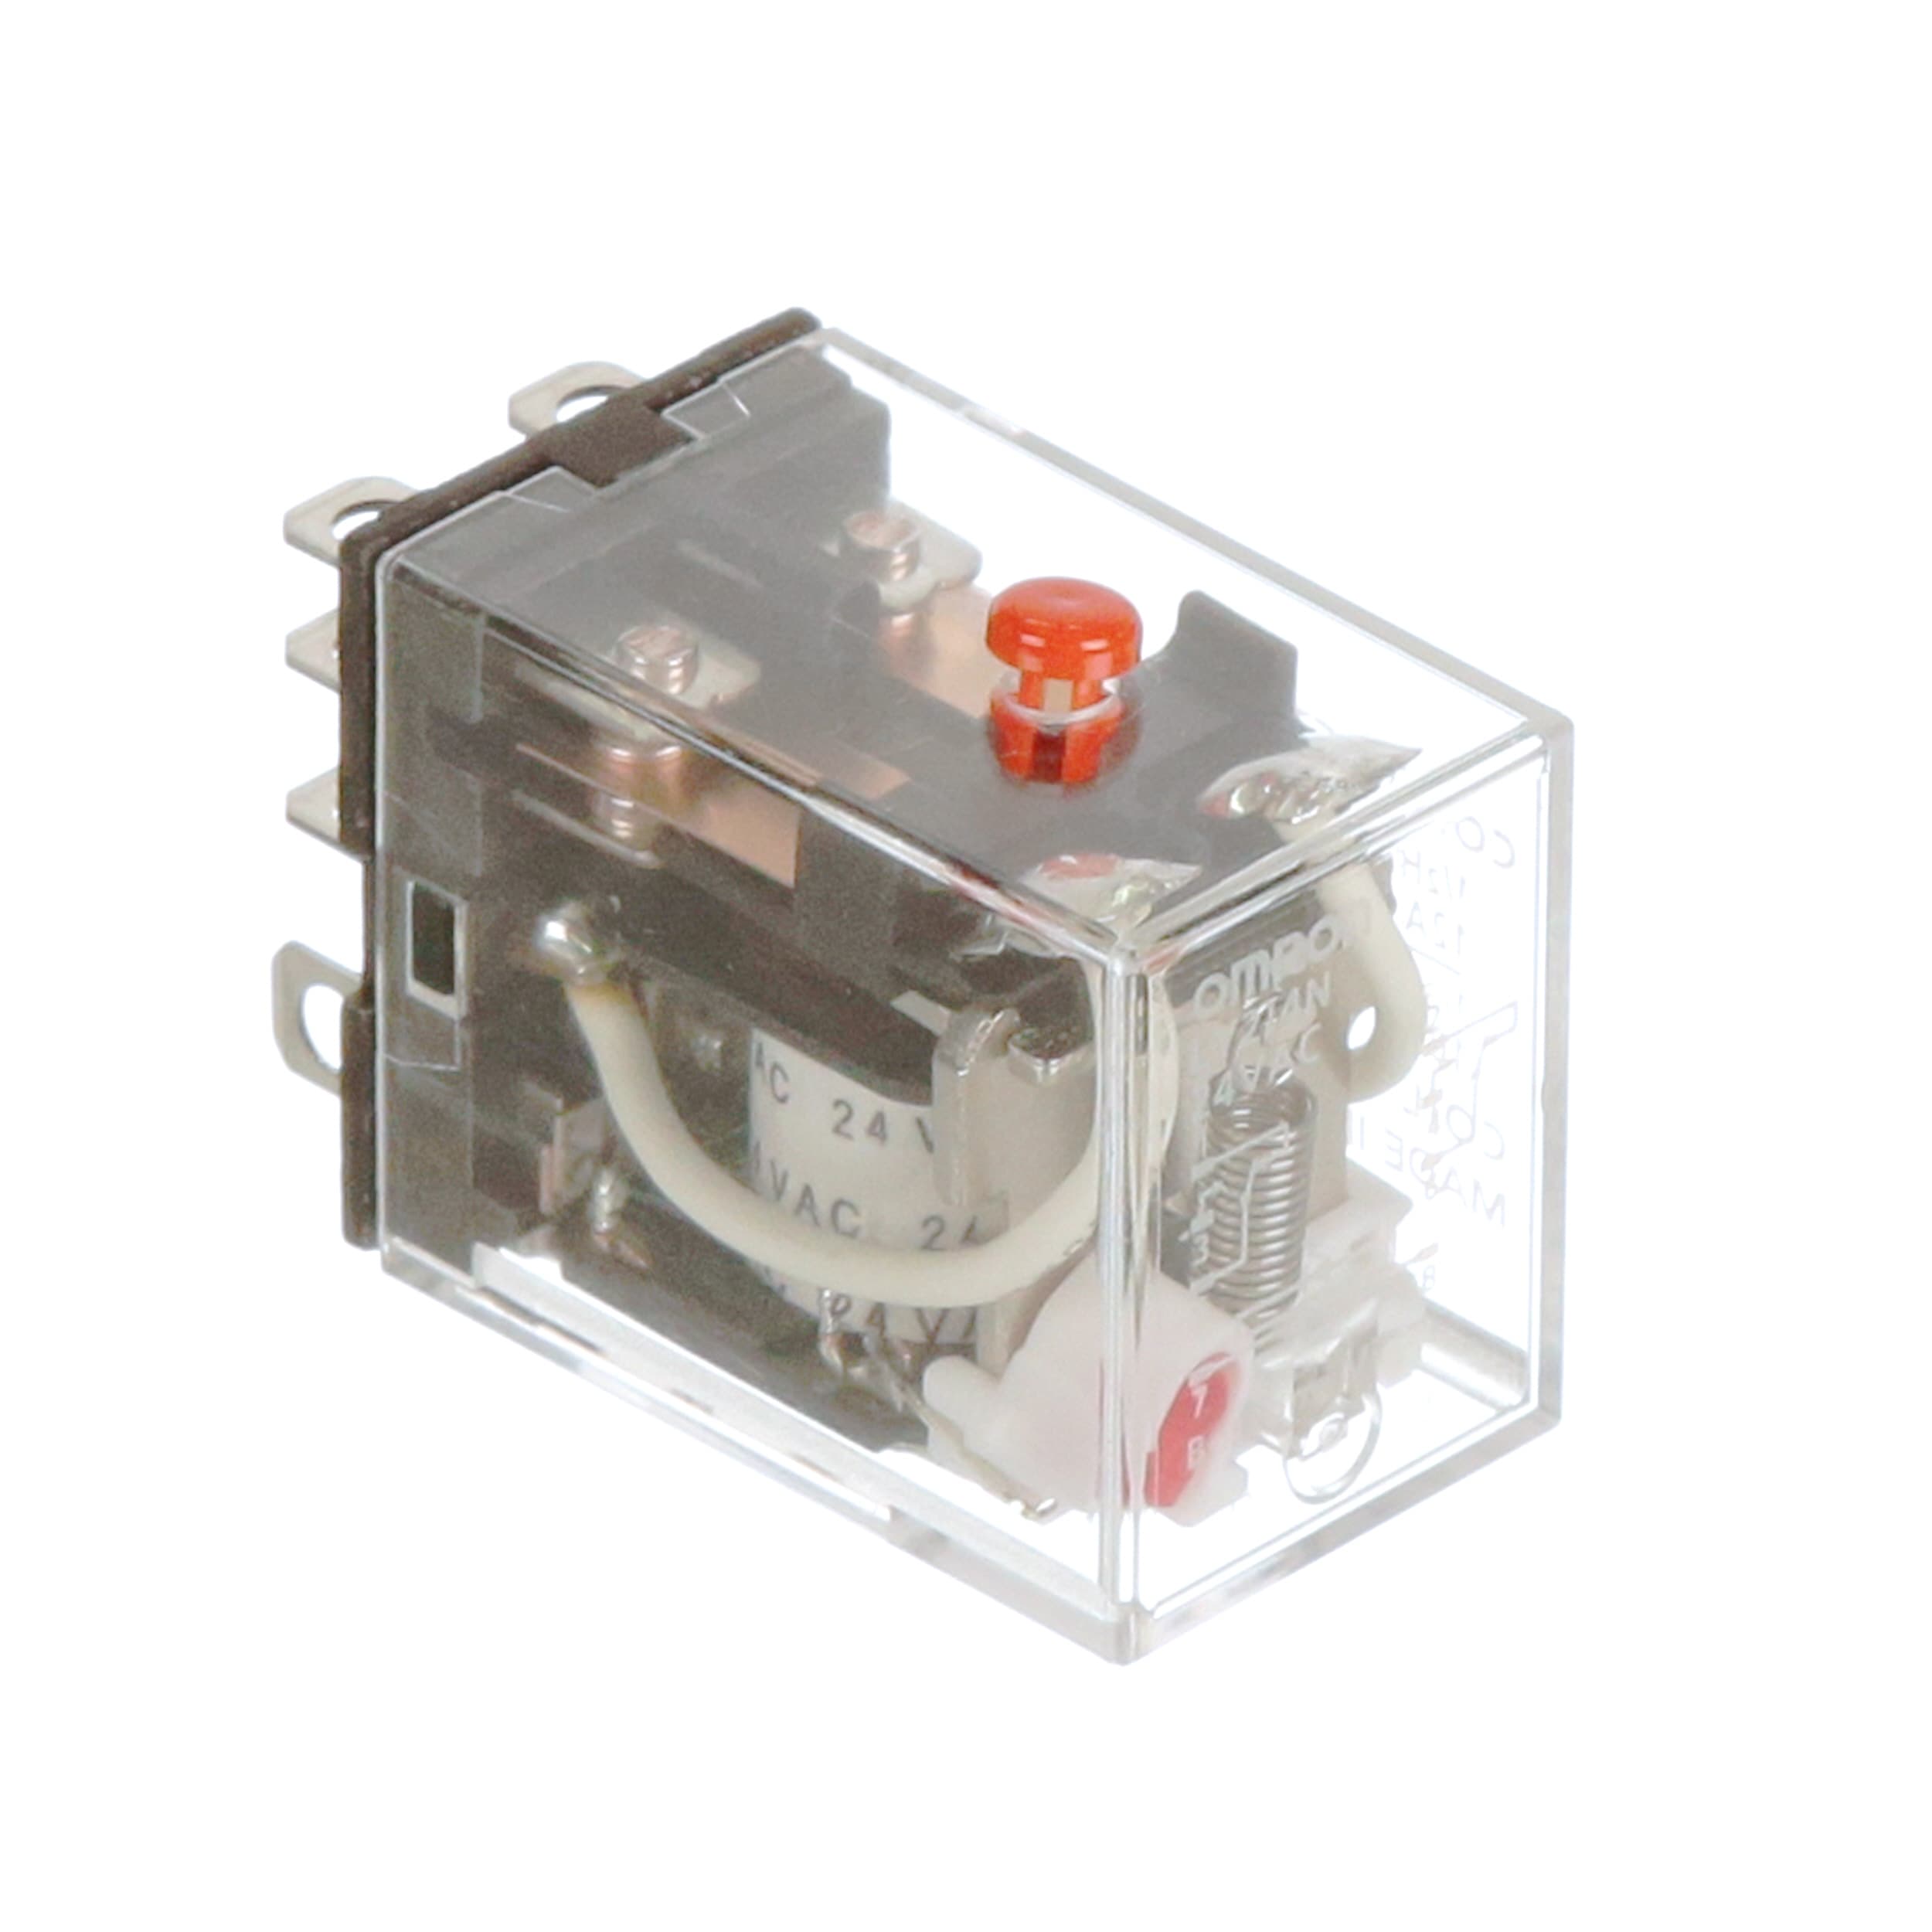 24 VAC Rate 93.6 mA at 50 Hz and 80 mA at 60 Hz Rated Load Current Standard Bracket Moutning Quadruple Pole Double Pole Contacts Singe Contact LED Indicator and Push-To-Test Button Type Omron LY4I4N AC24 General Purpose Relay Plug-In/Solder Terminal 